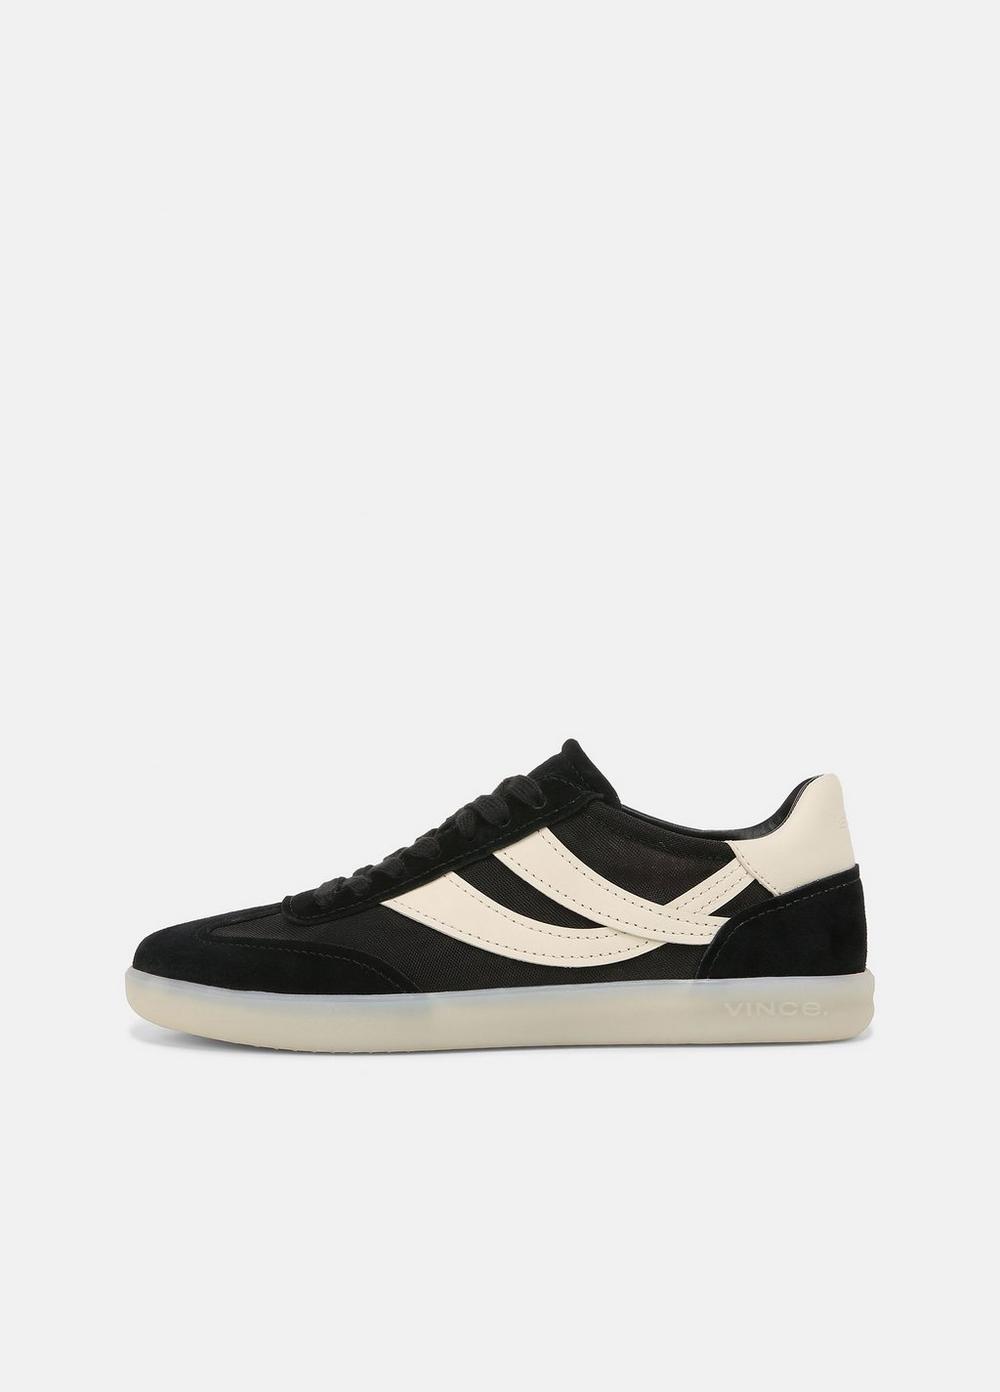 Oasis Leather And Suede Sneaker, Black, Size 5 Vince